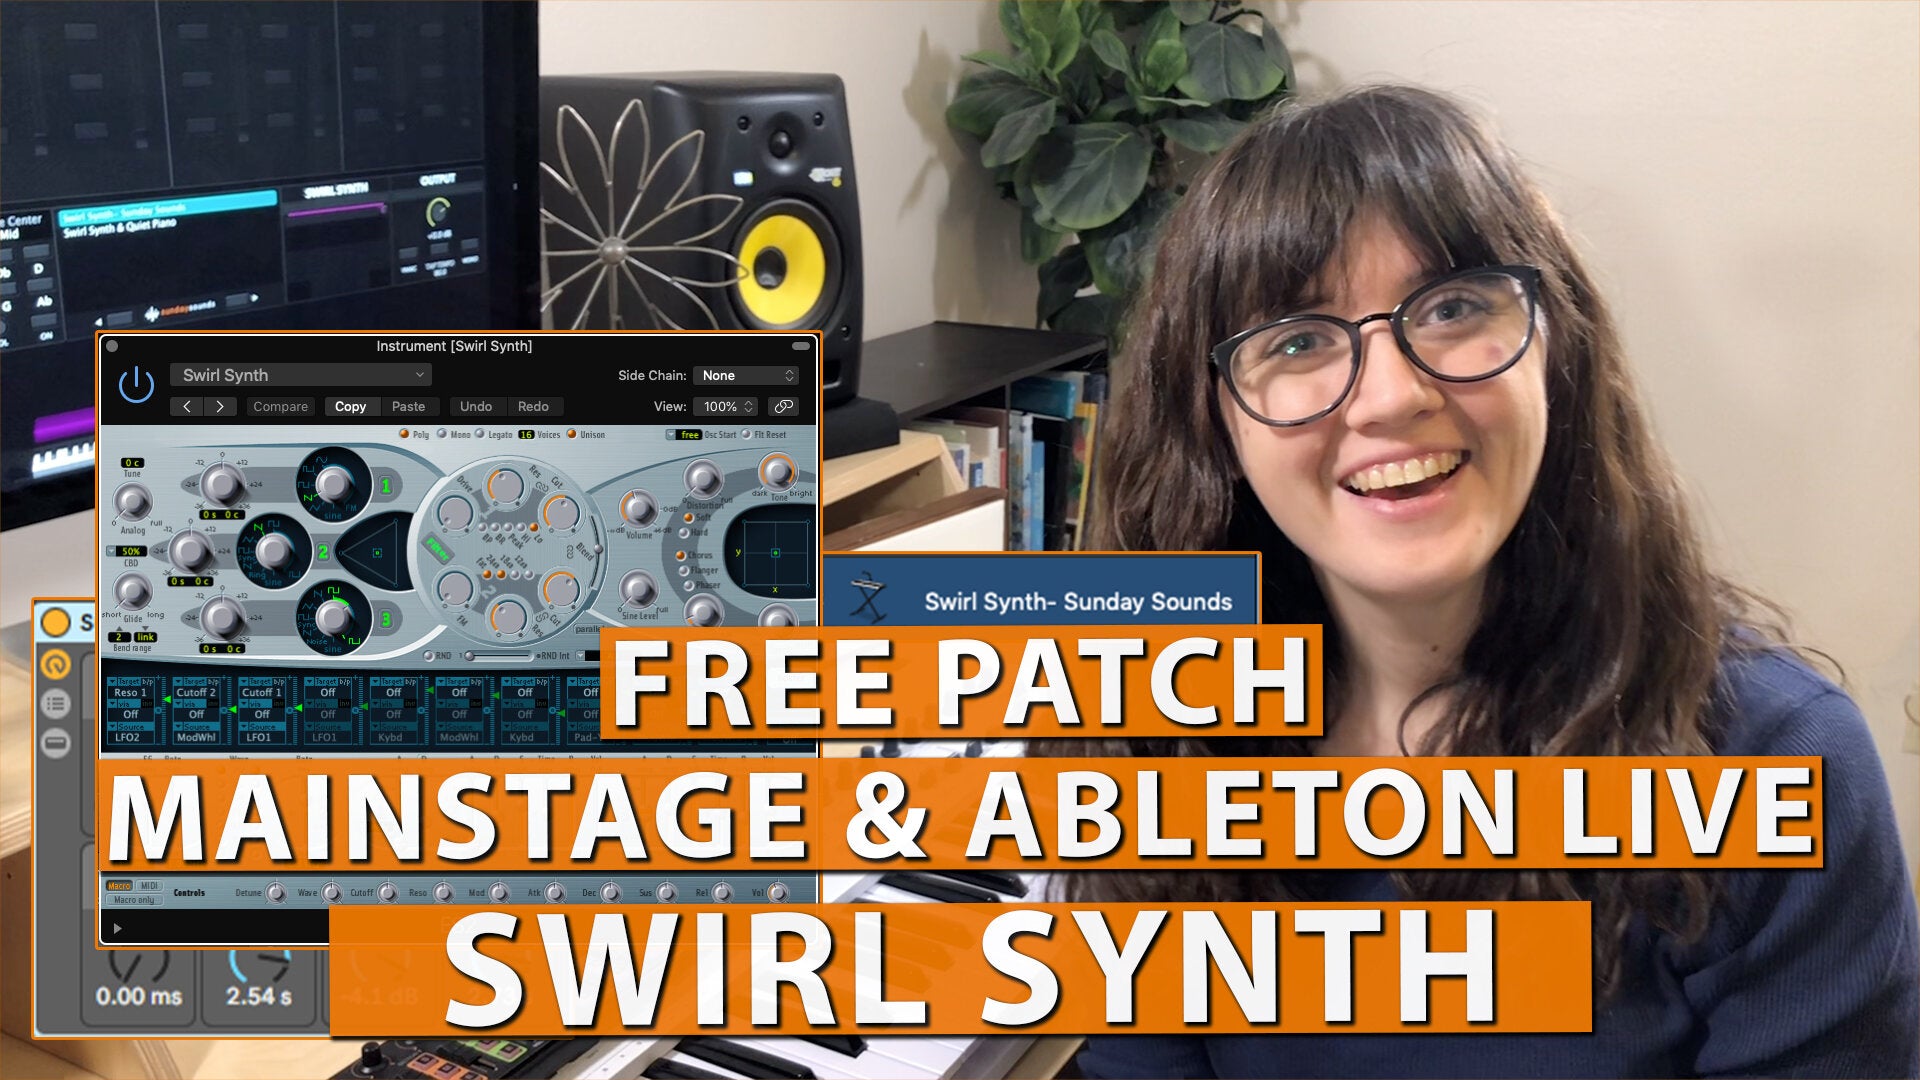 Free MainStage & Ableton Worship Patch! - Synth Swirl